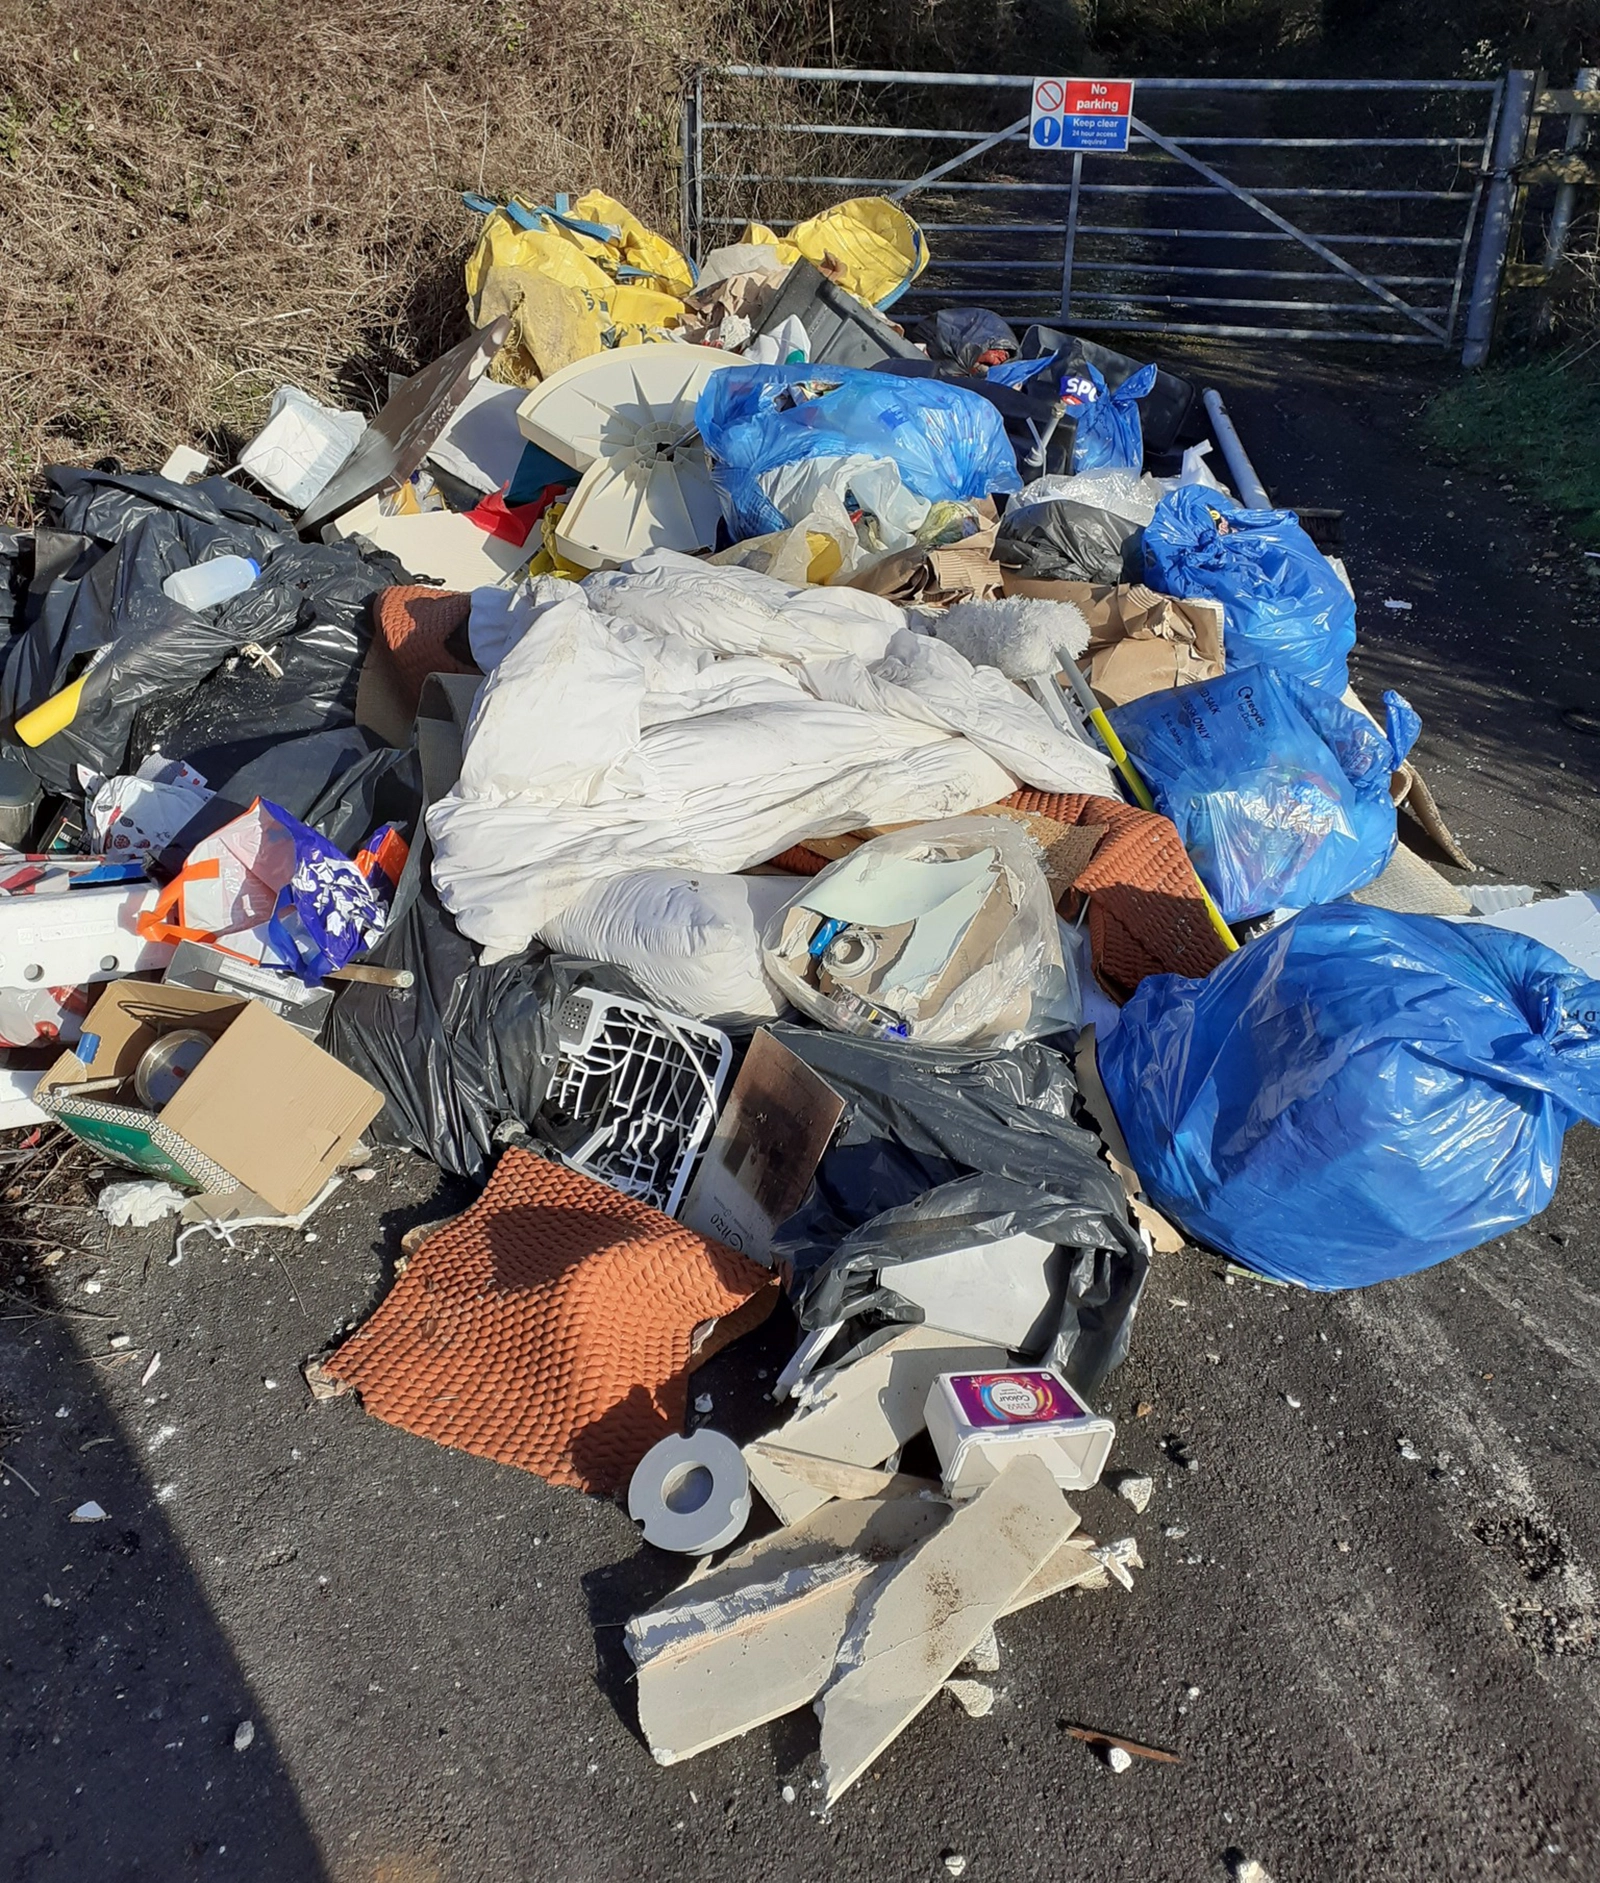 Investigators are looking into where the fly-tipped waste came from